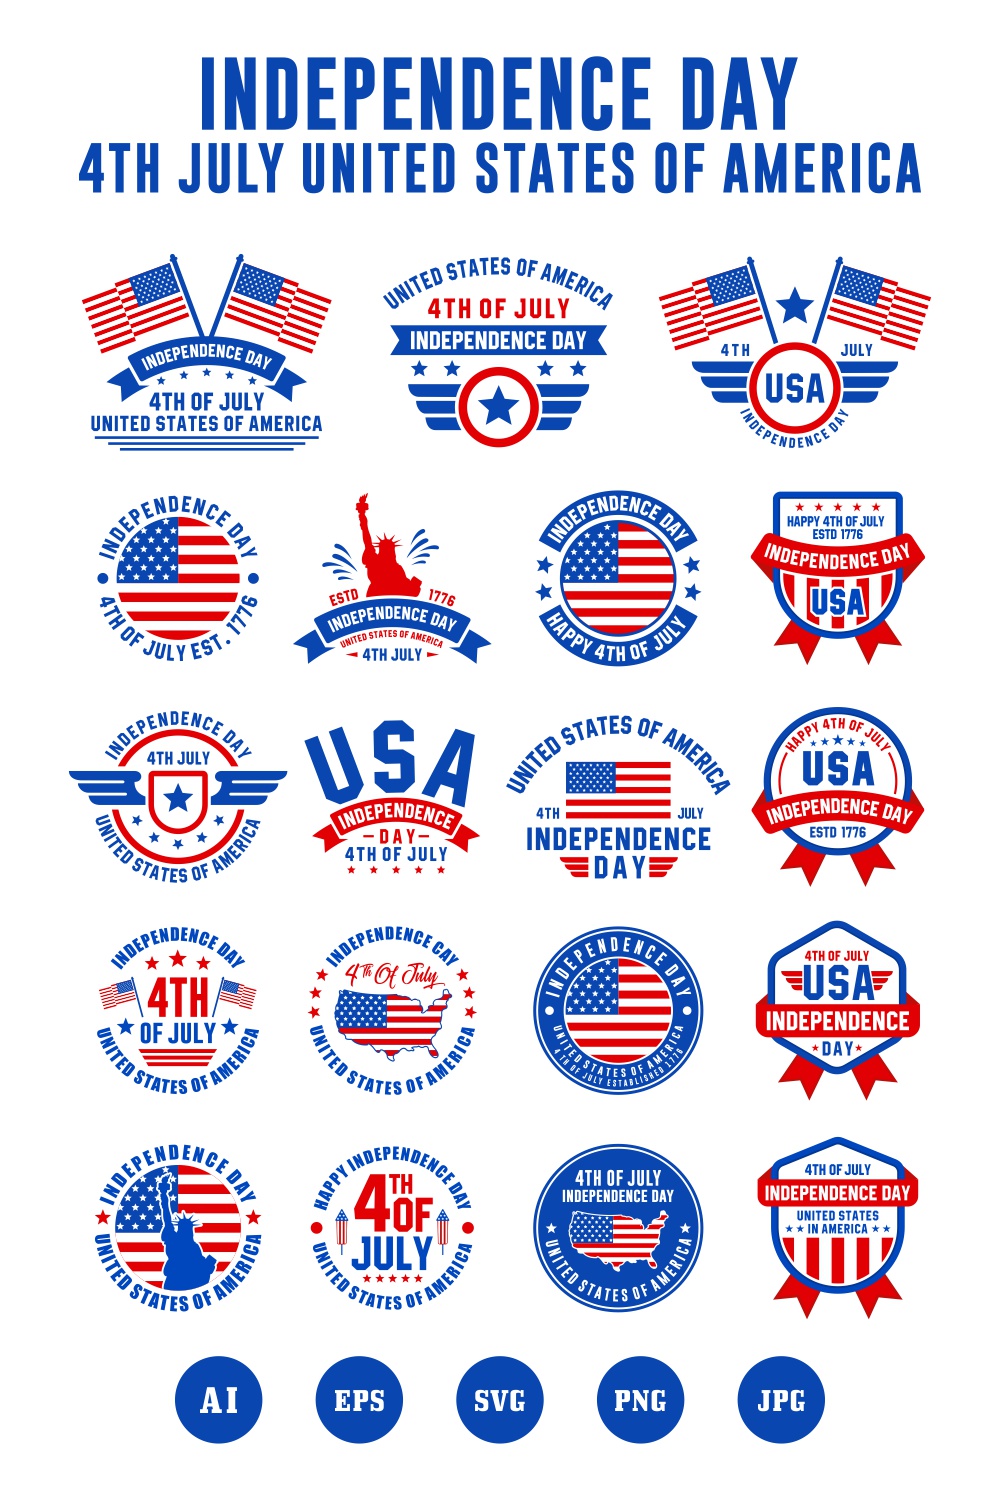 18 Independence Day 4 th July united states of america design collection - $12 pinterest preview image.